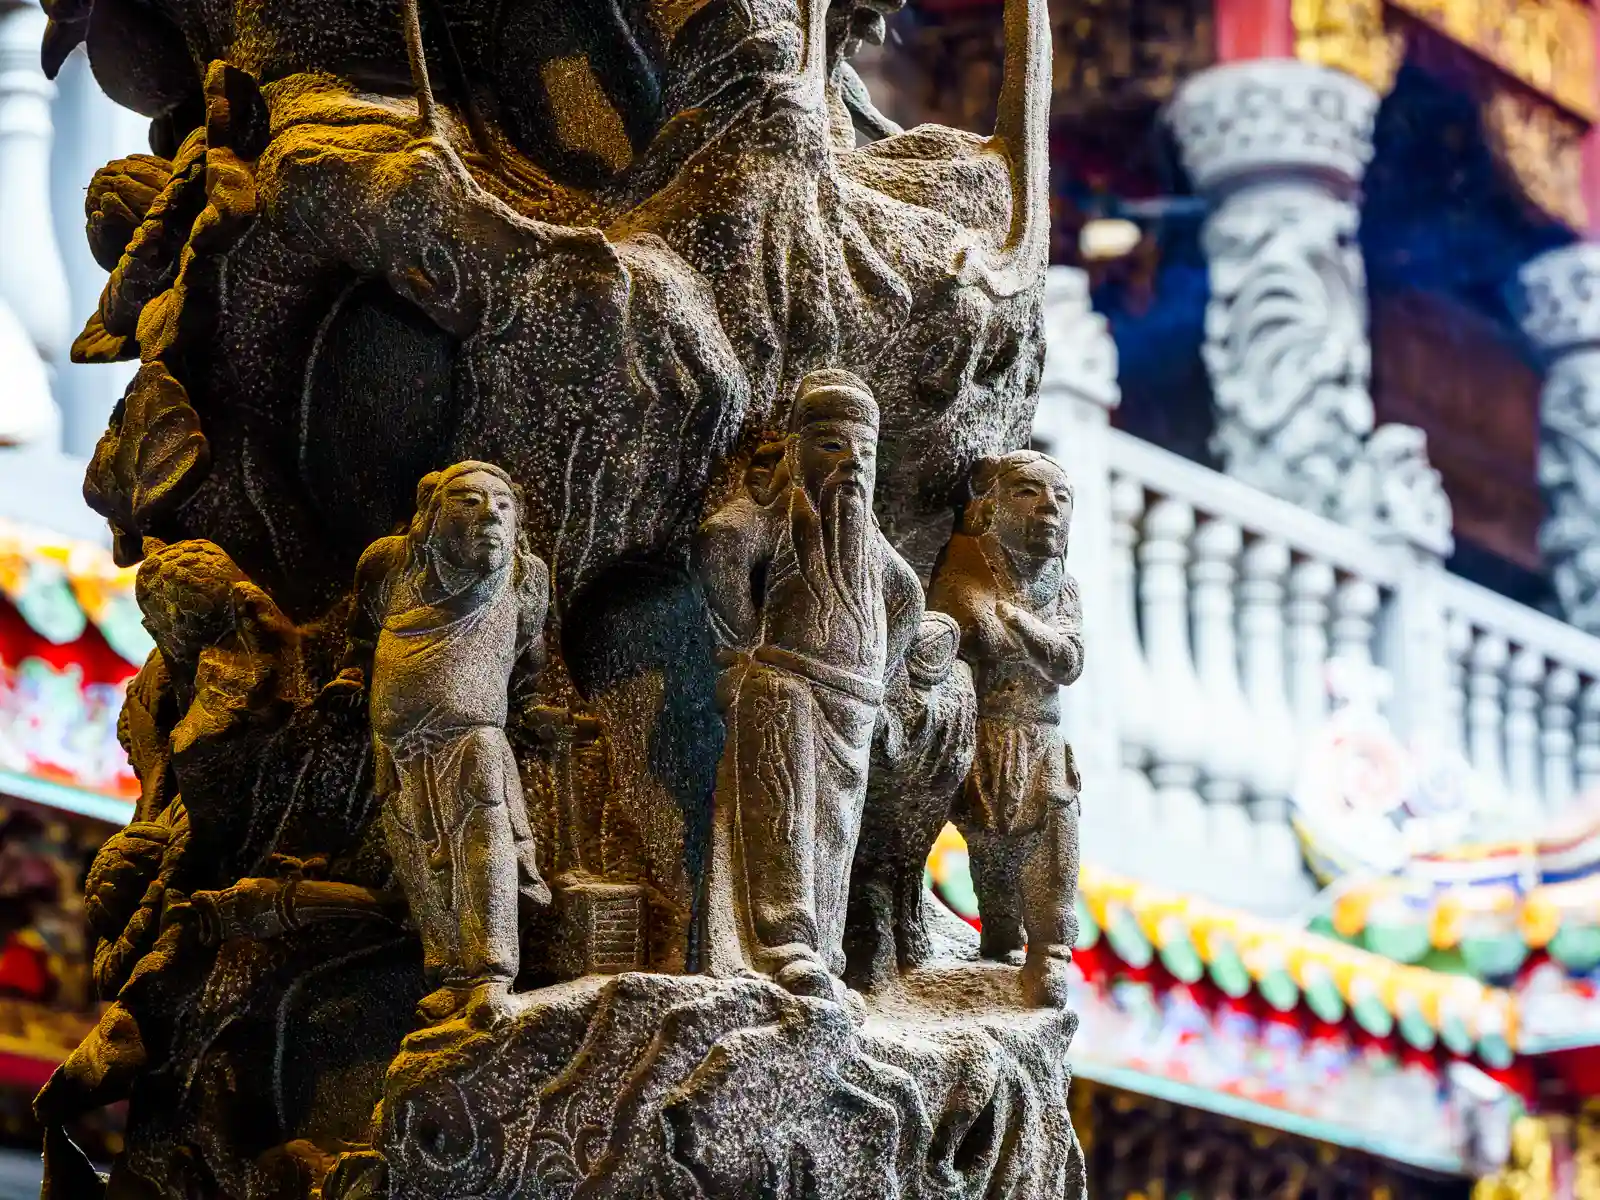 God-like figures decorate a carved stone column in Qingshui Zushi Temple.